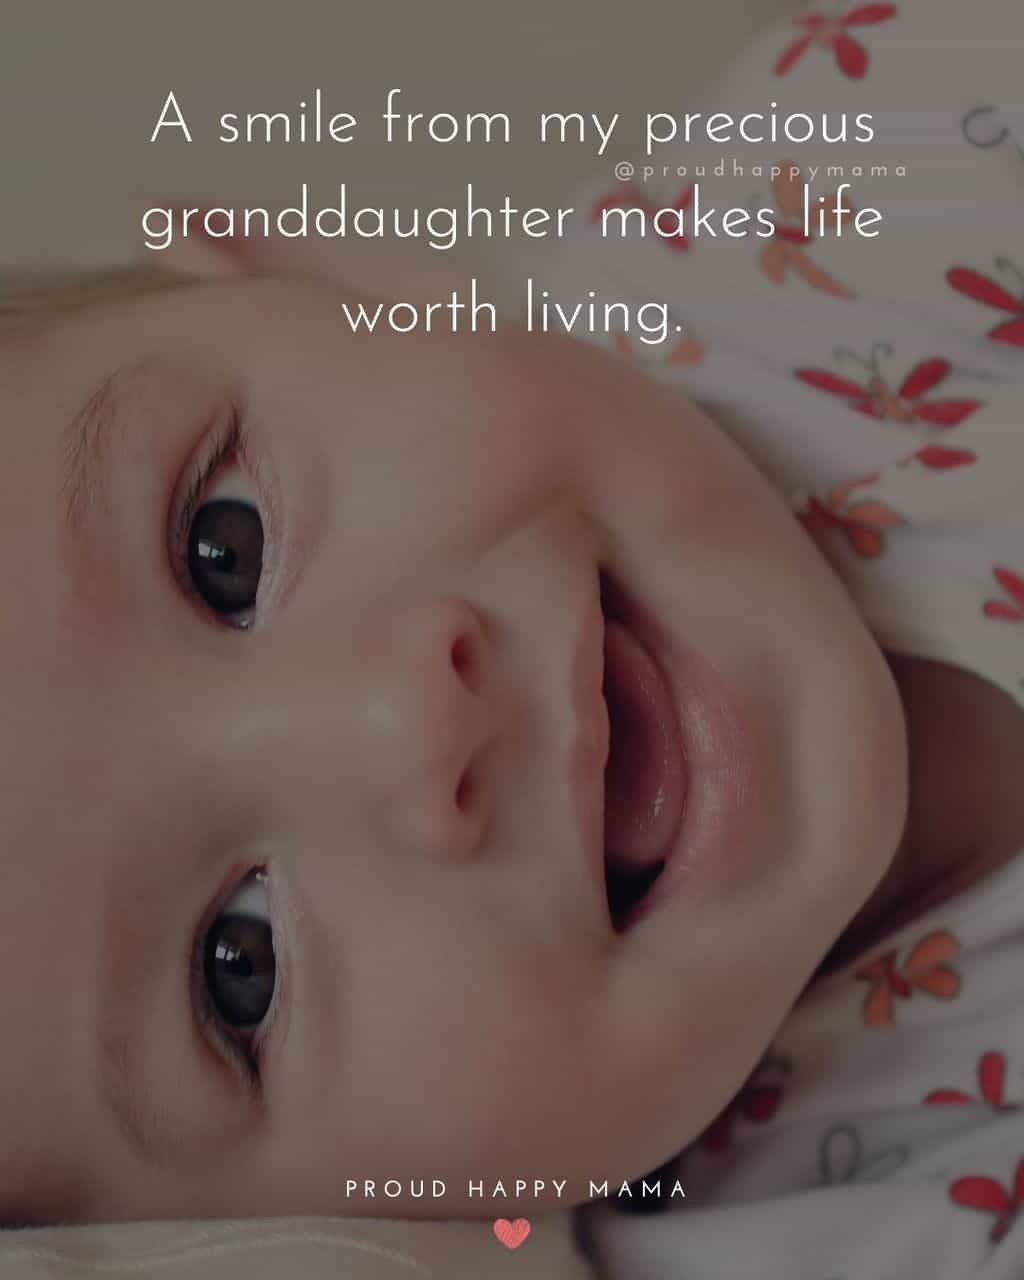 Granddaughter Quotes - A smile from my precious granddaughter makes life worth living.